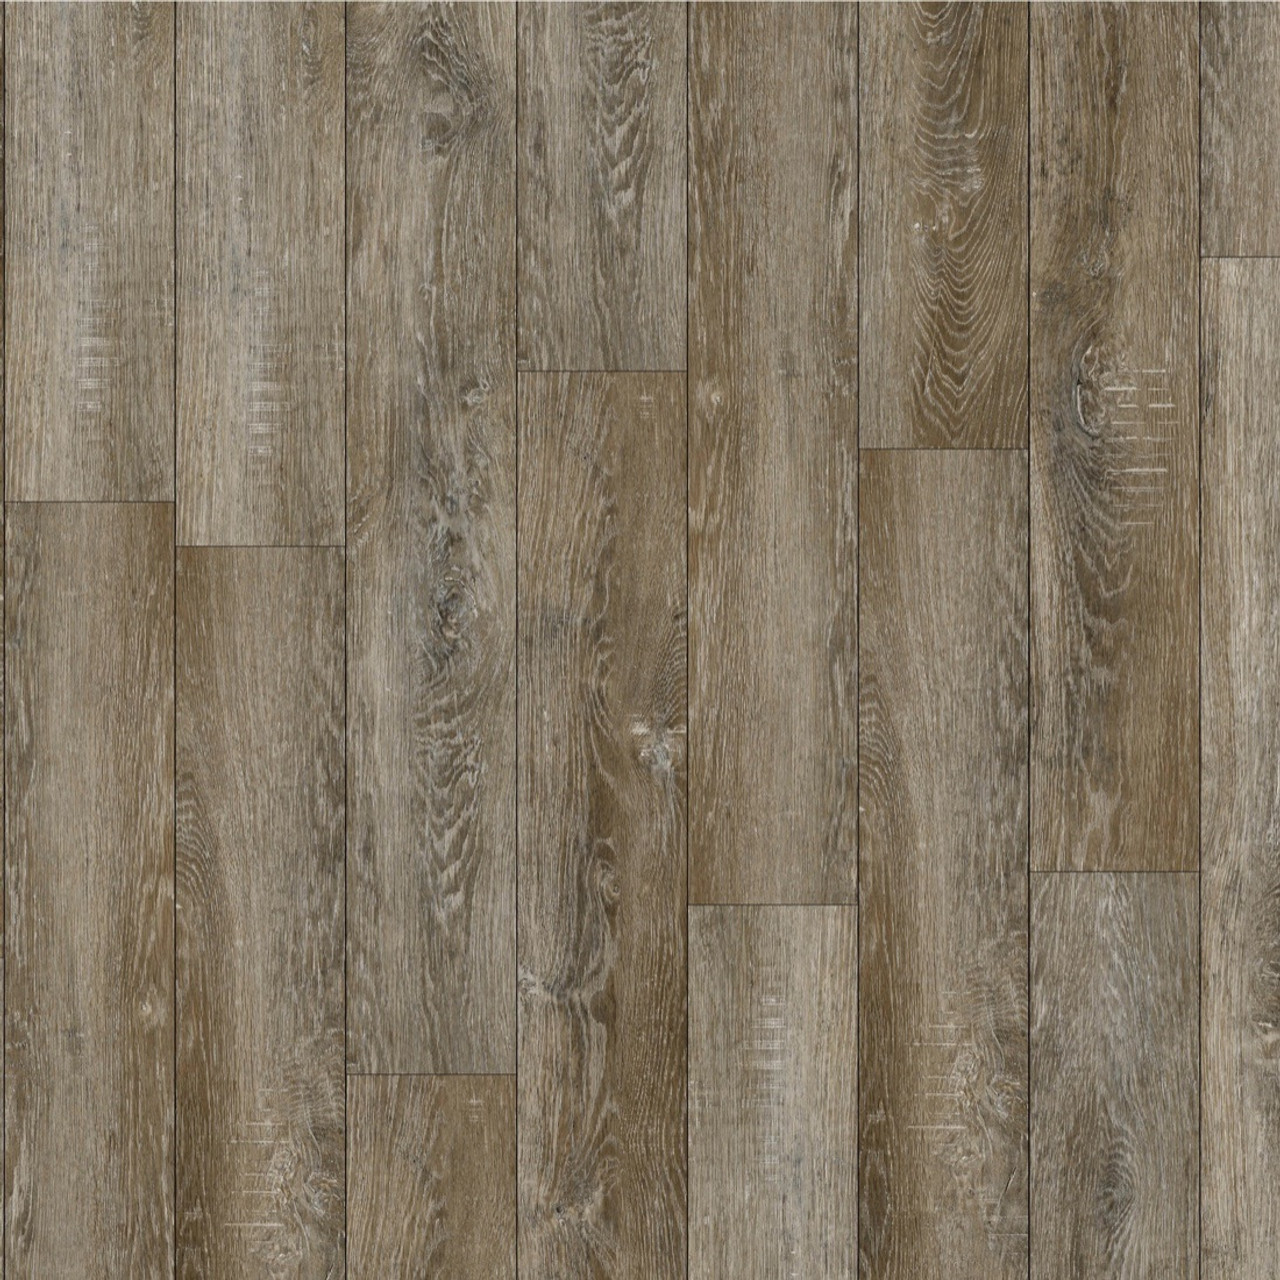 Create Flooring by Muchsee Sparta Diamond is Available For a Great ...